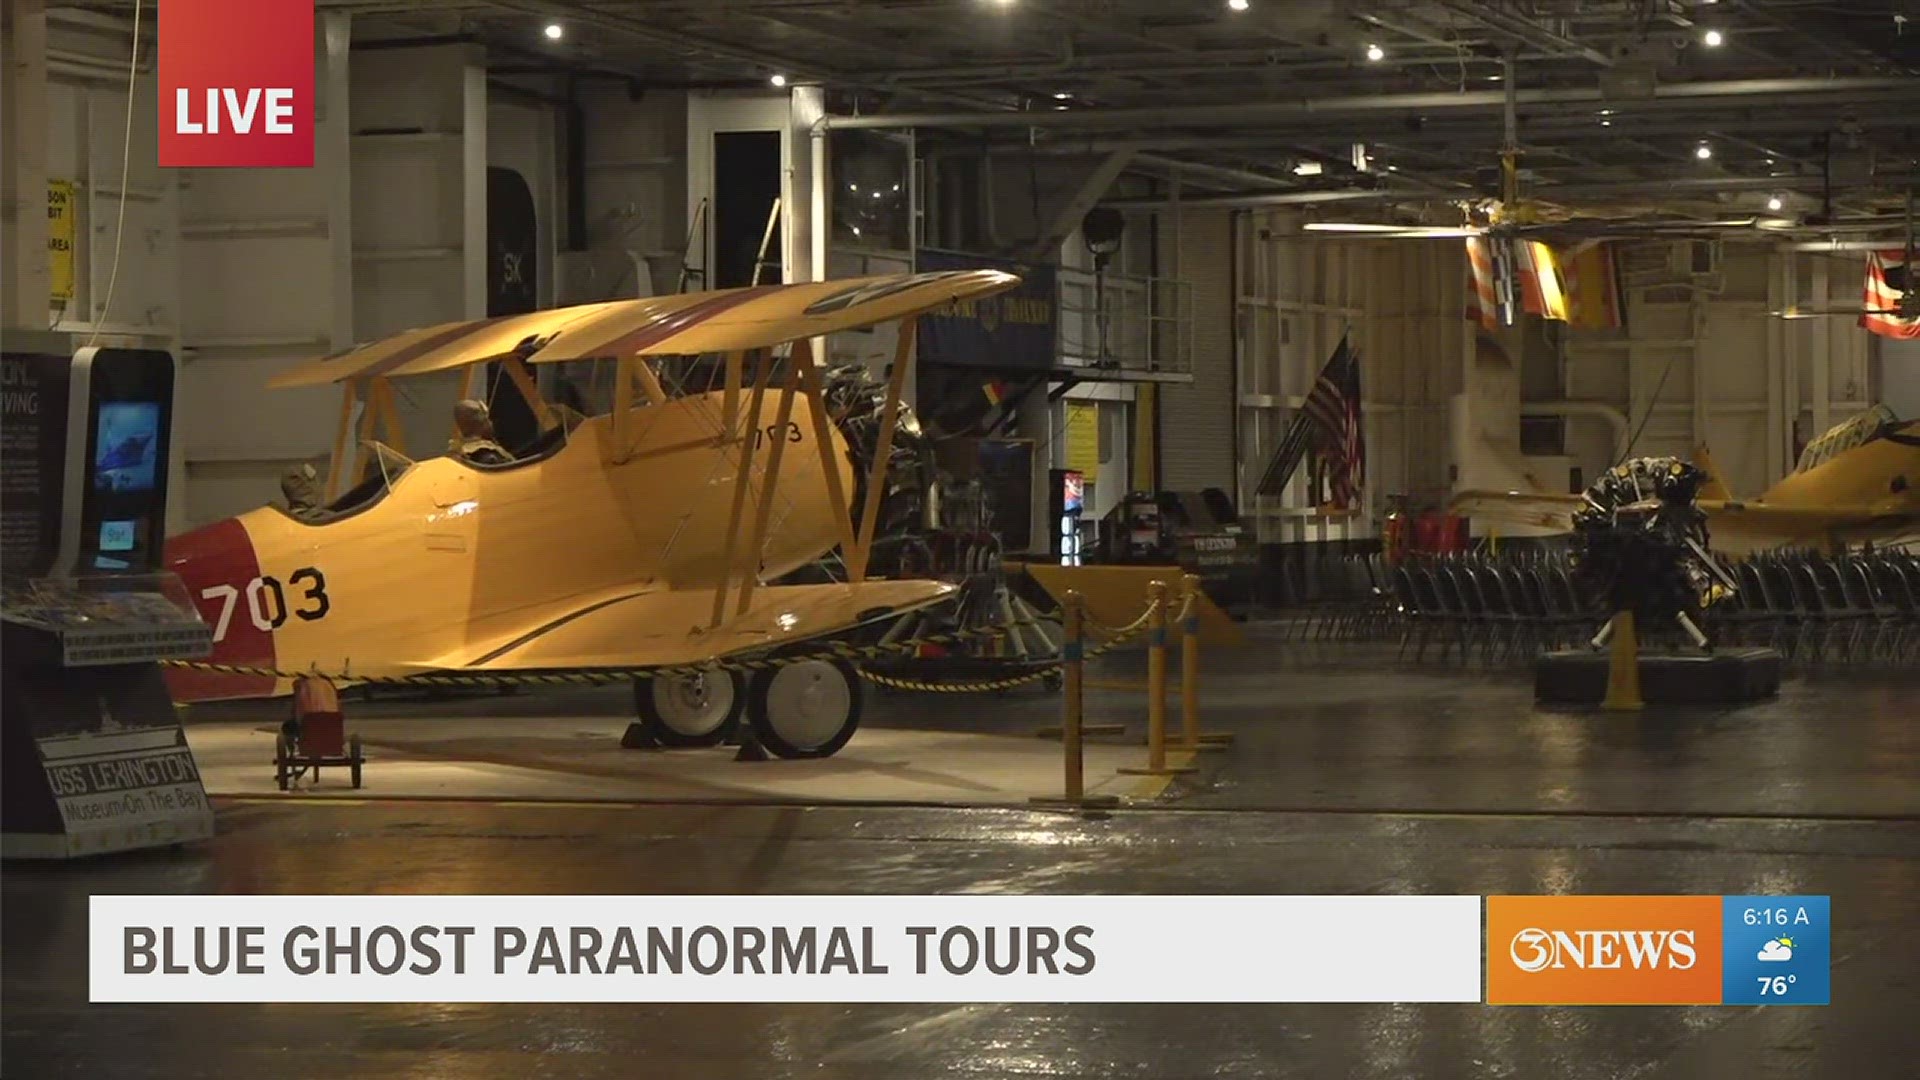 Explore some hotspots on The Blue Ghost during the tours, and hopefully make it out unscathed!